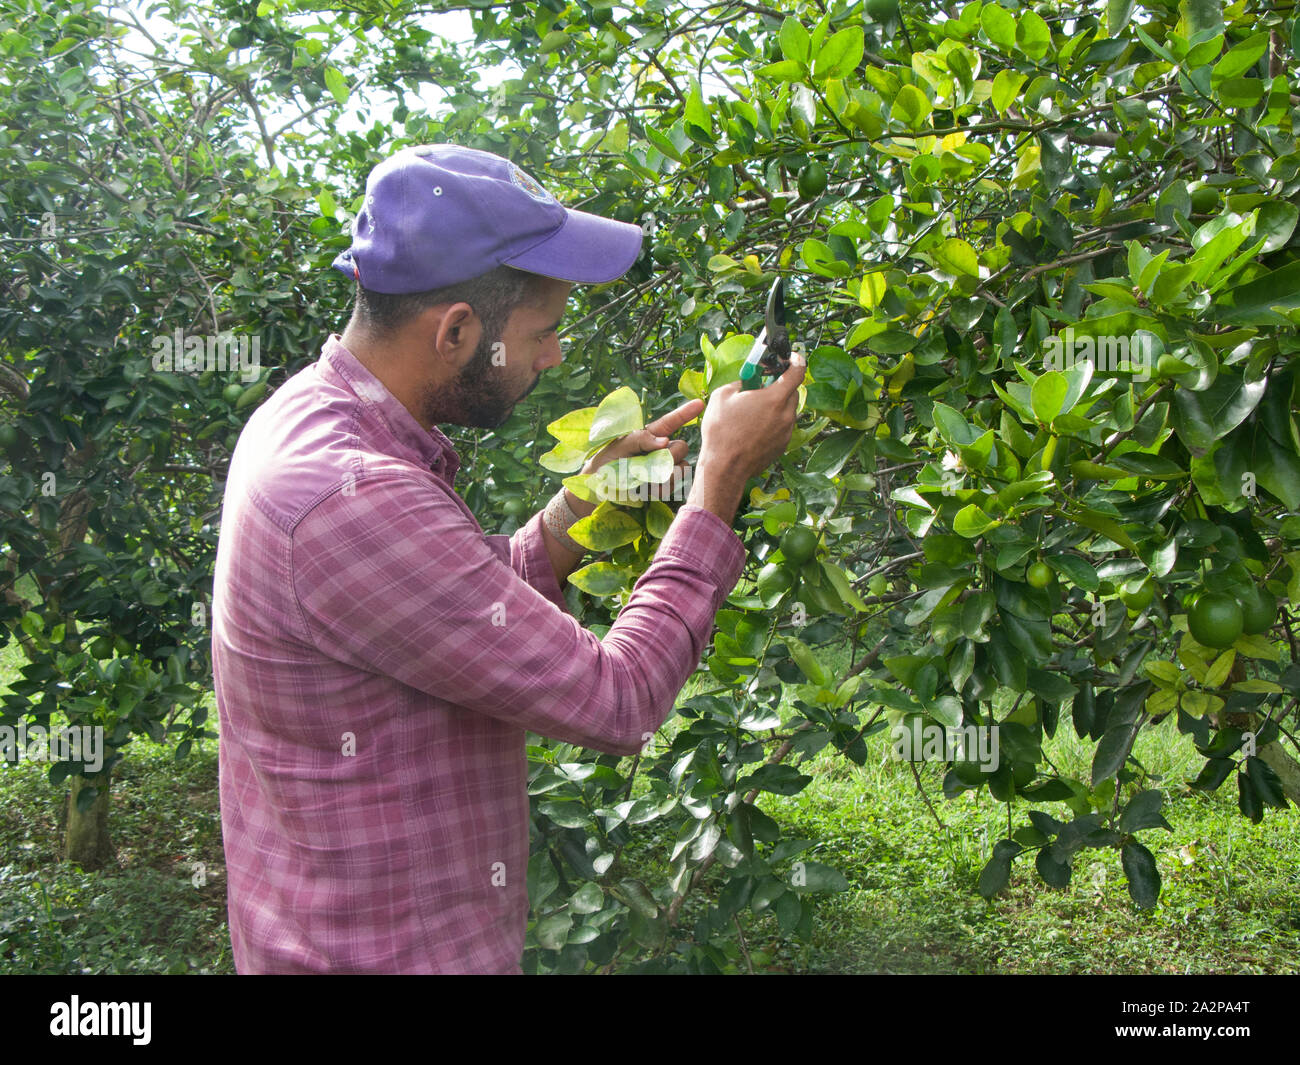 Researcher examines a citrus tree heavily infected with HLB huanglongbing citrus greening in an orchard Stock Photo